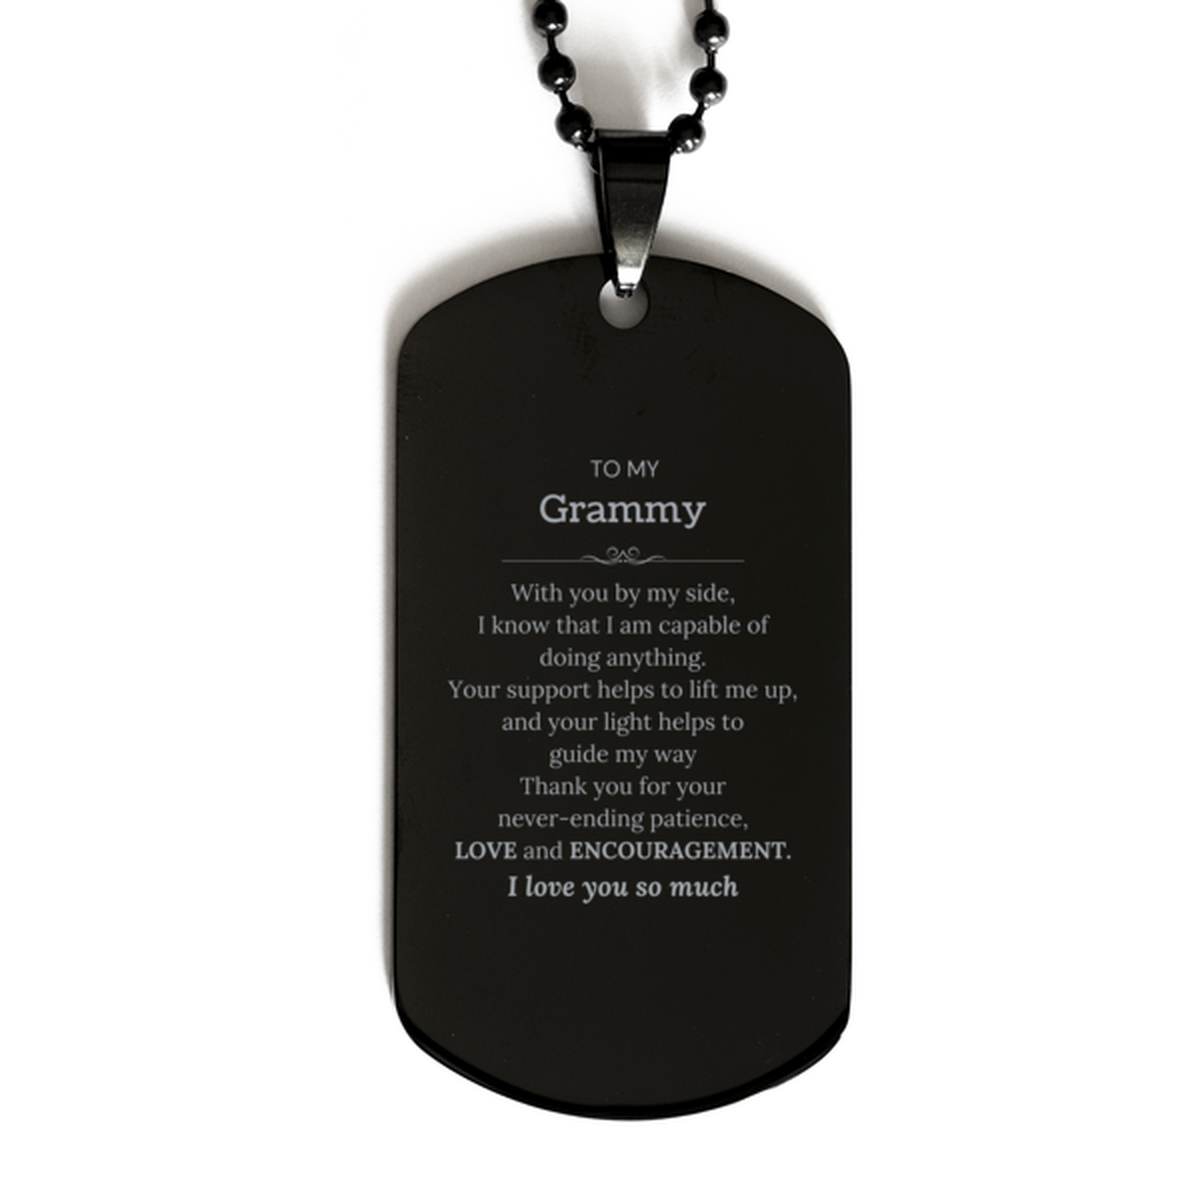 Appreciation Grammy Black Dog Tag Gifts, To My Grammy Birthday Christmas Wedding Keepsake Gifts for Grammy With you by my side, I know that I am capable of doing anything. I love you so much